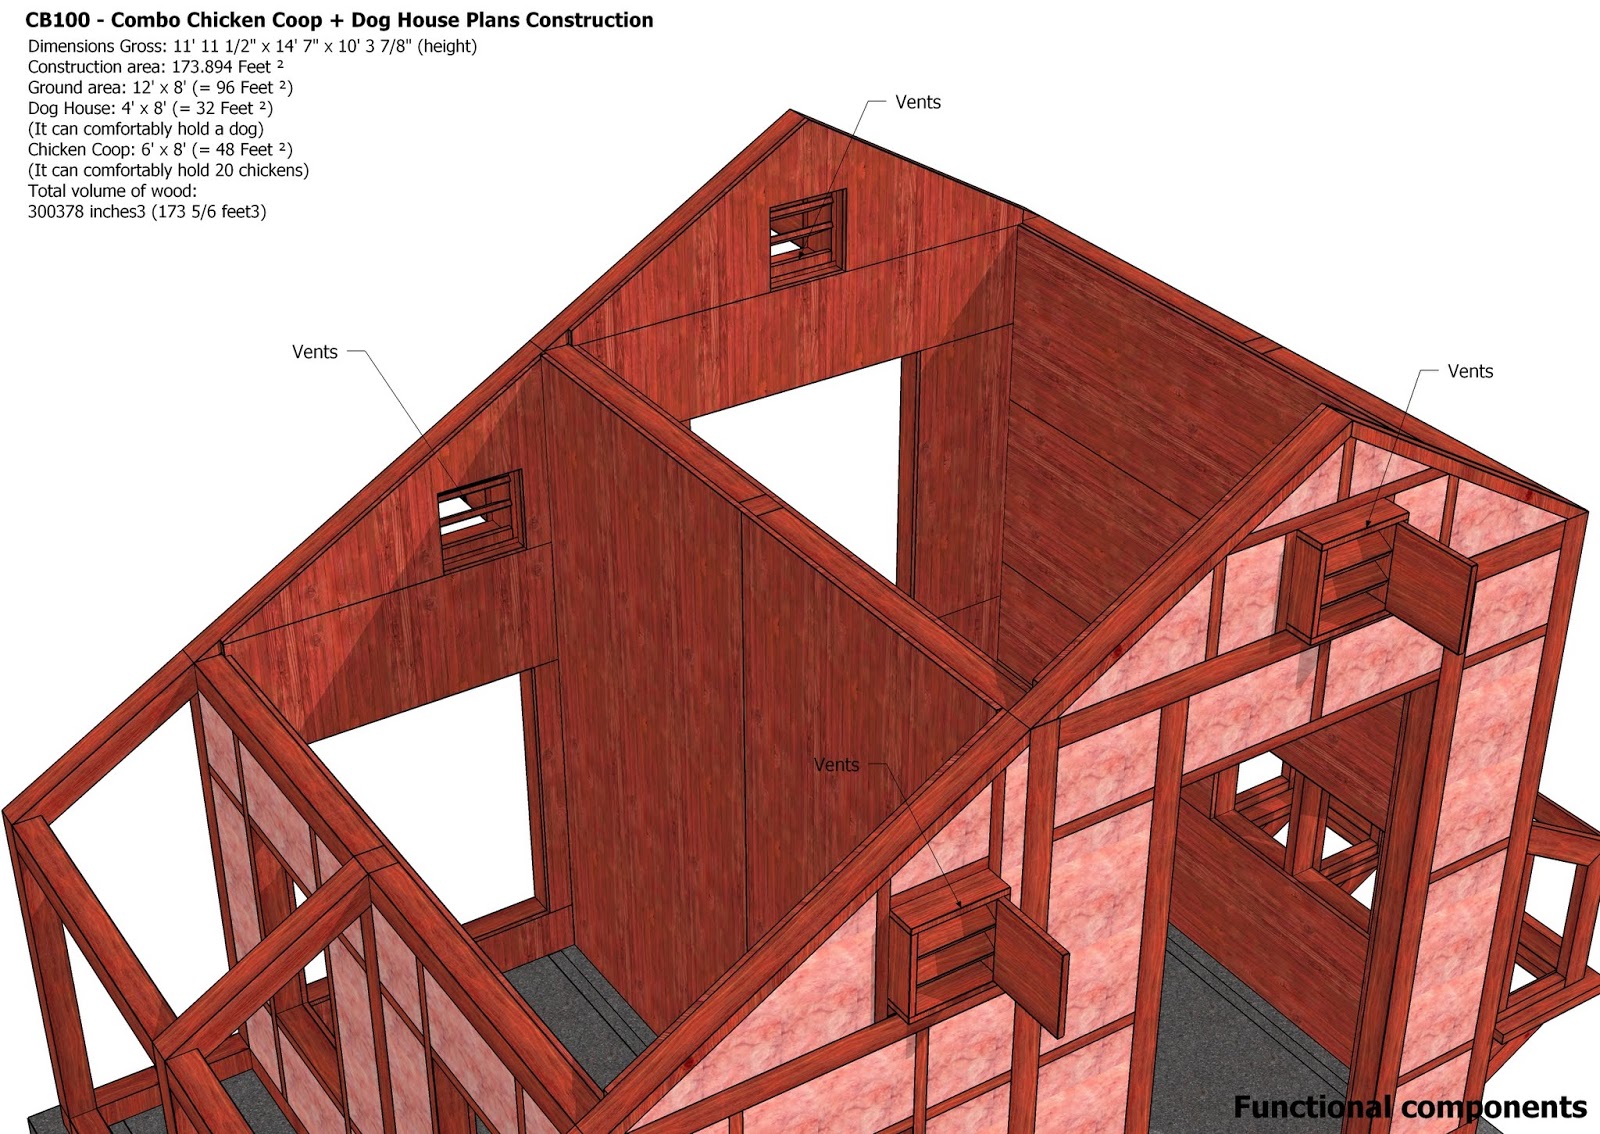  Plans - Chicken Coop Plans Construction + Insulated Dog House Plans